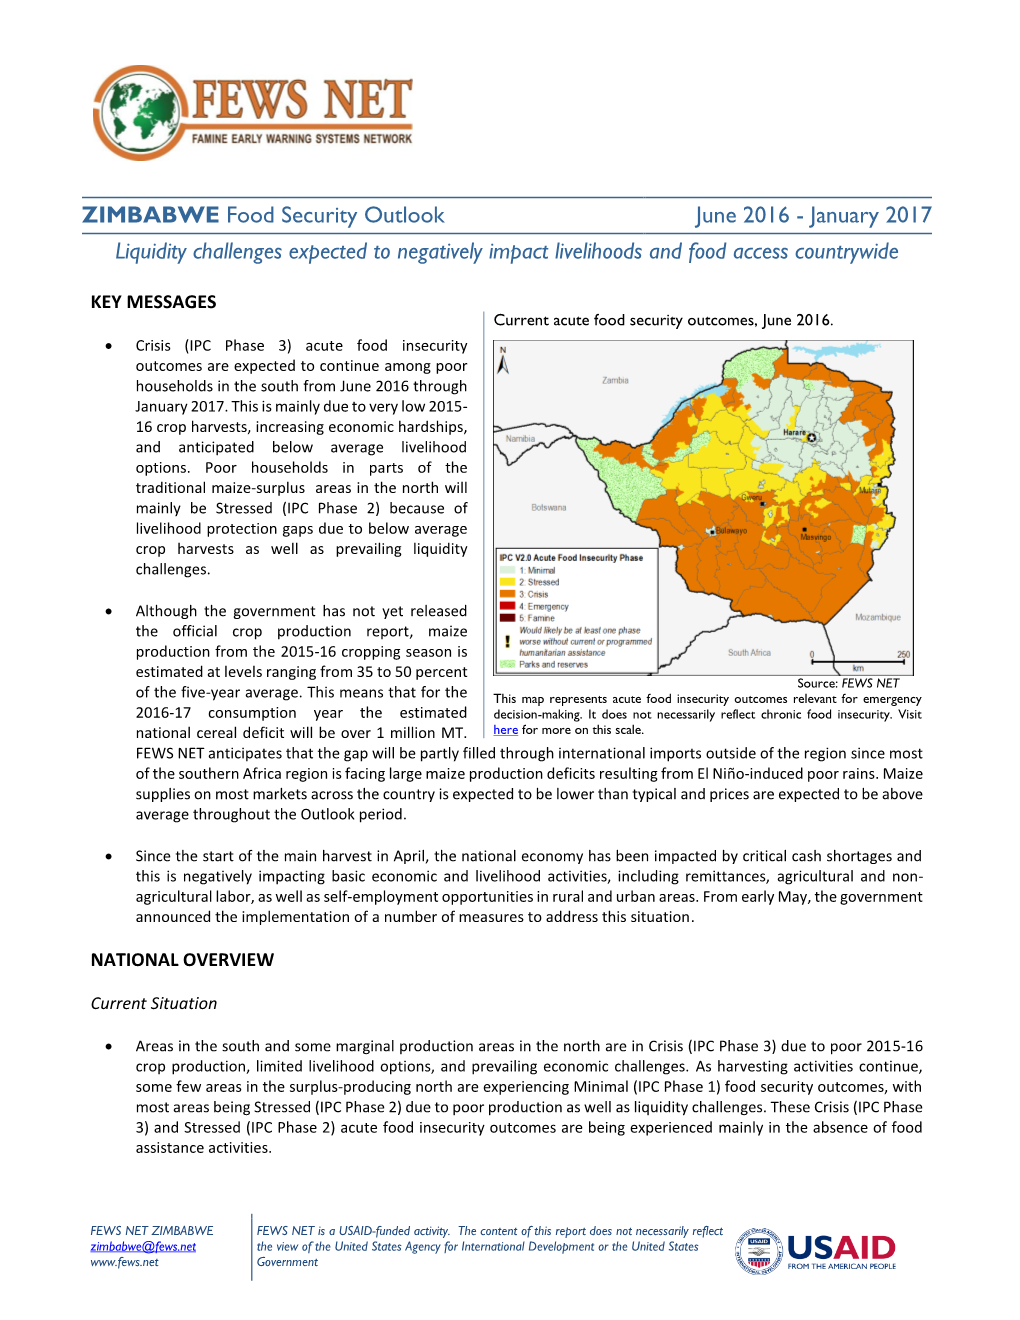 Food Security Outlook June 2016 - January 2017 Liquidity Challenges Expected to Negatively Impact Livelihoods and Food Access Countrywide